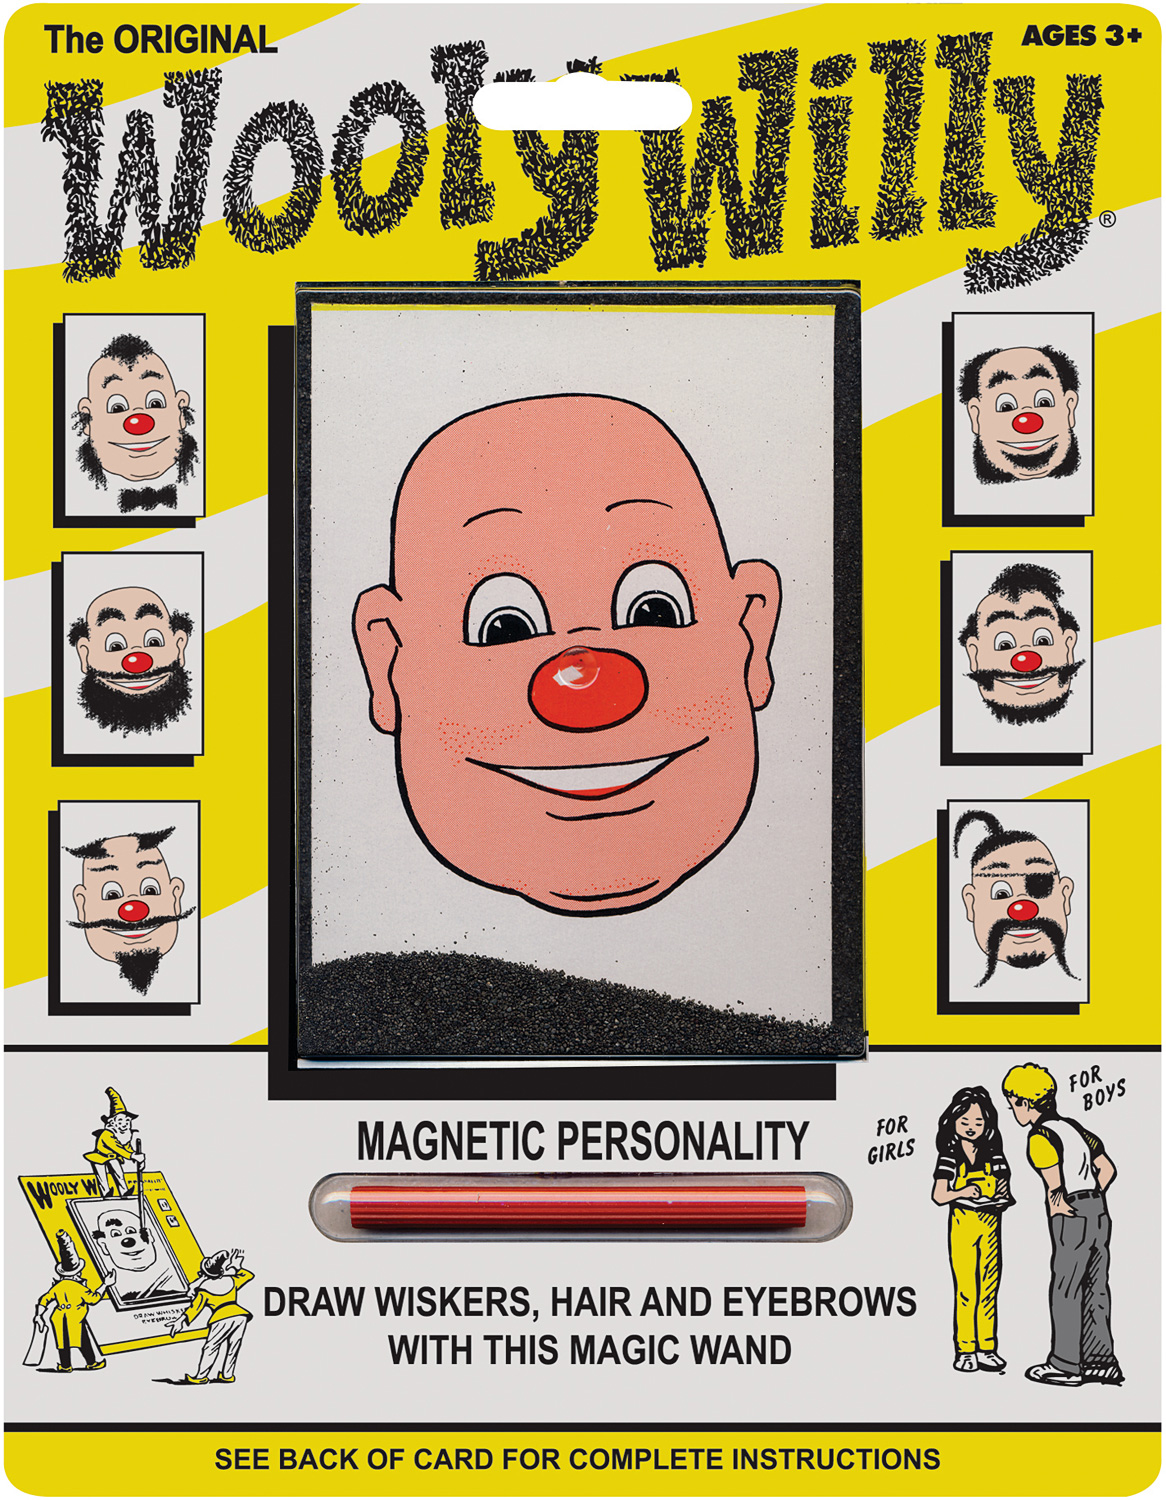 Wooly Willy Original